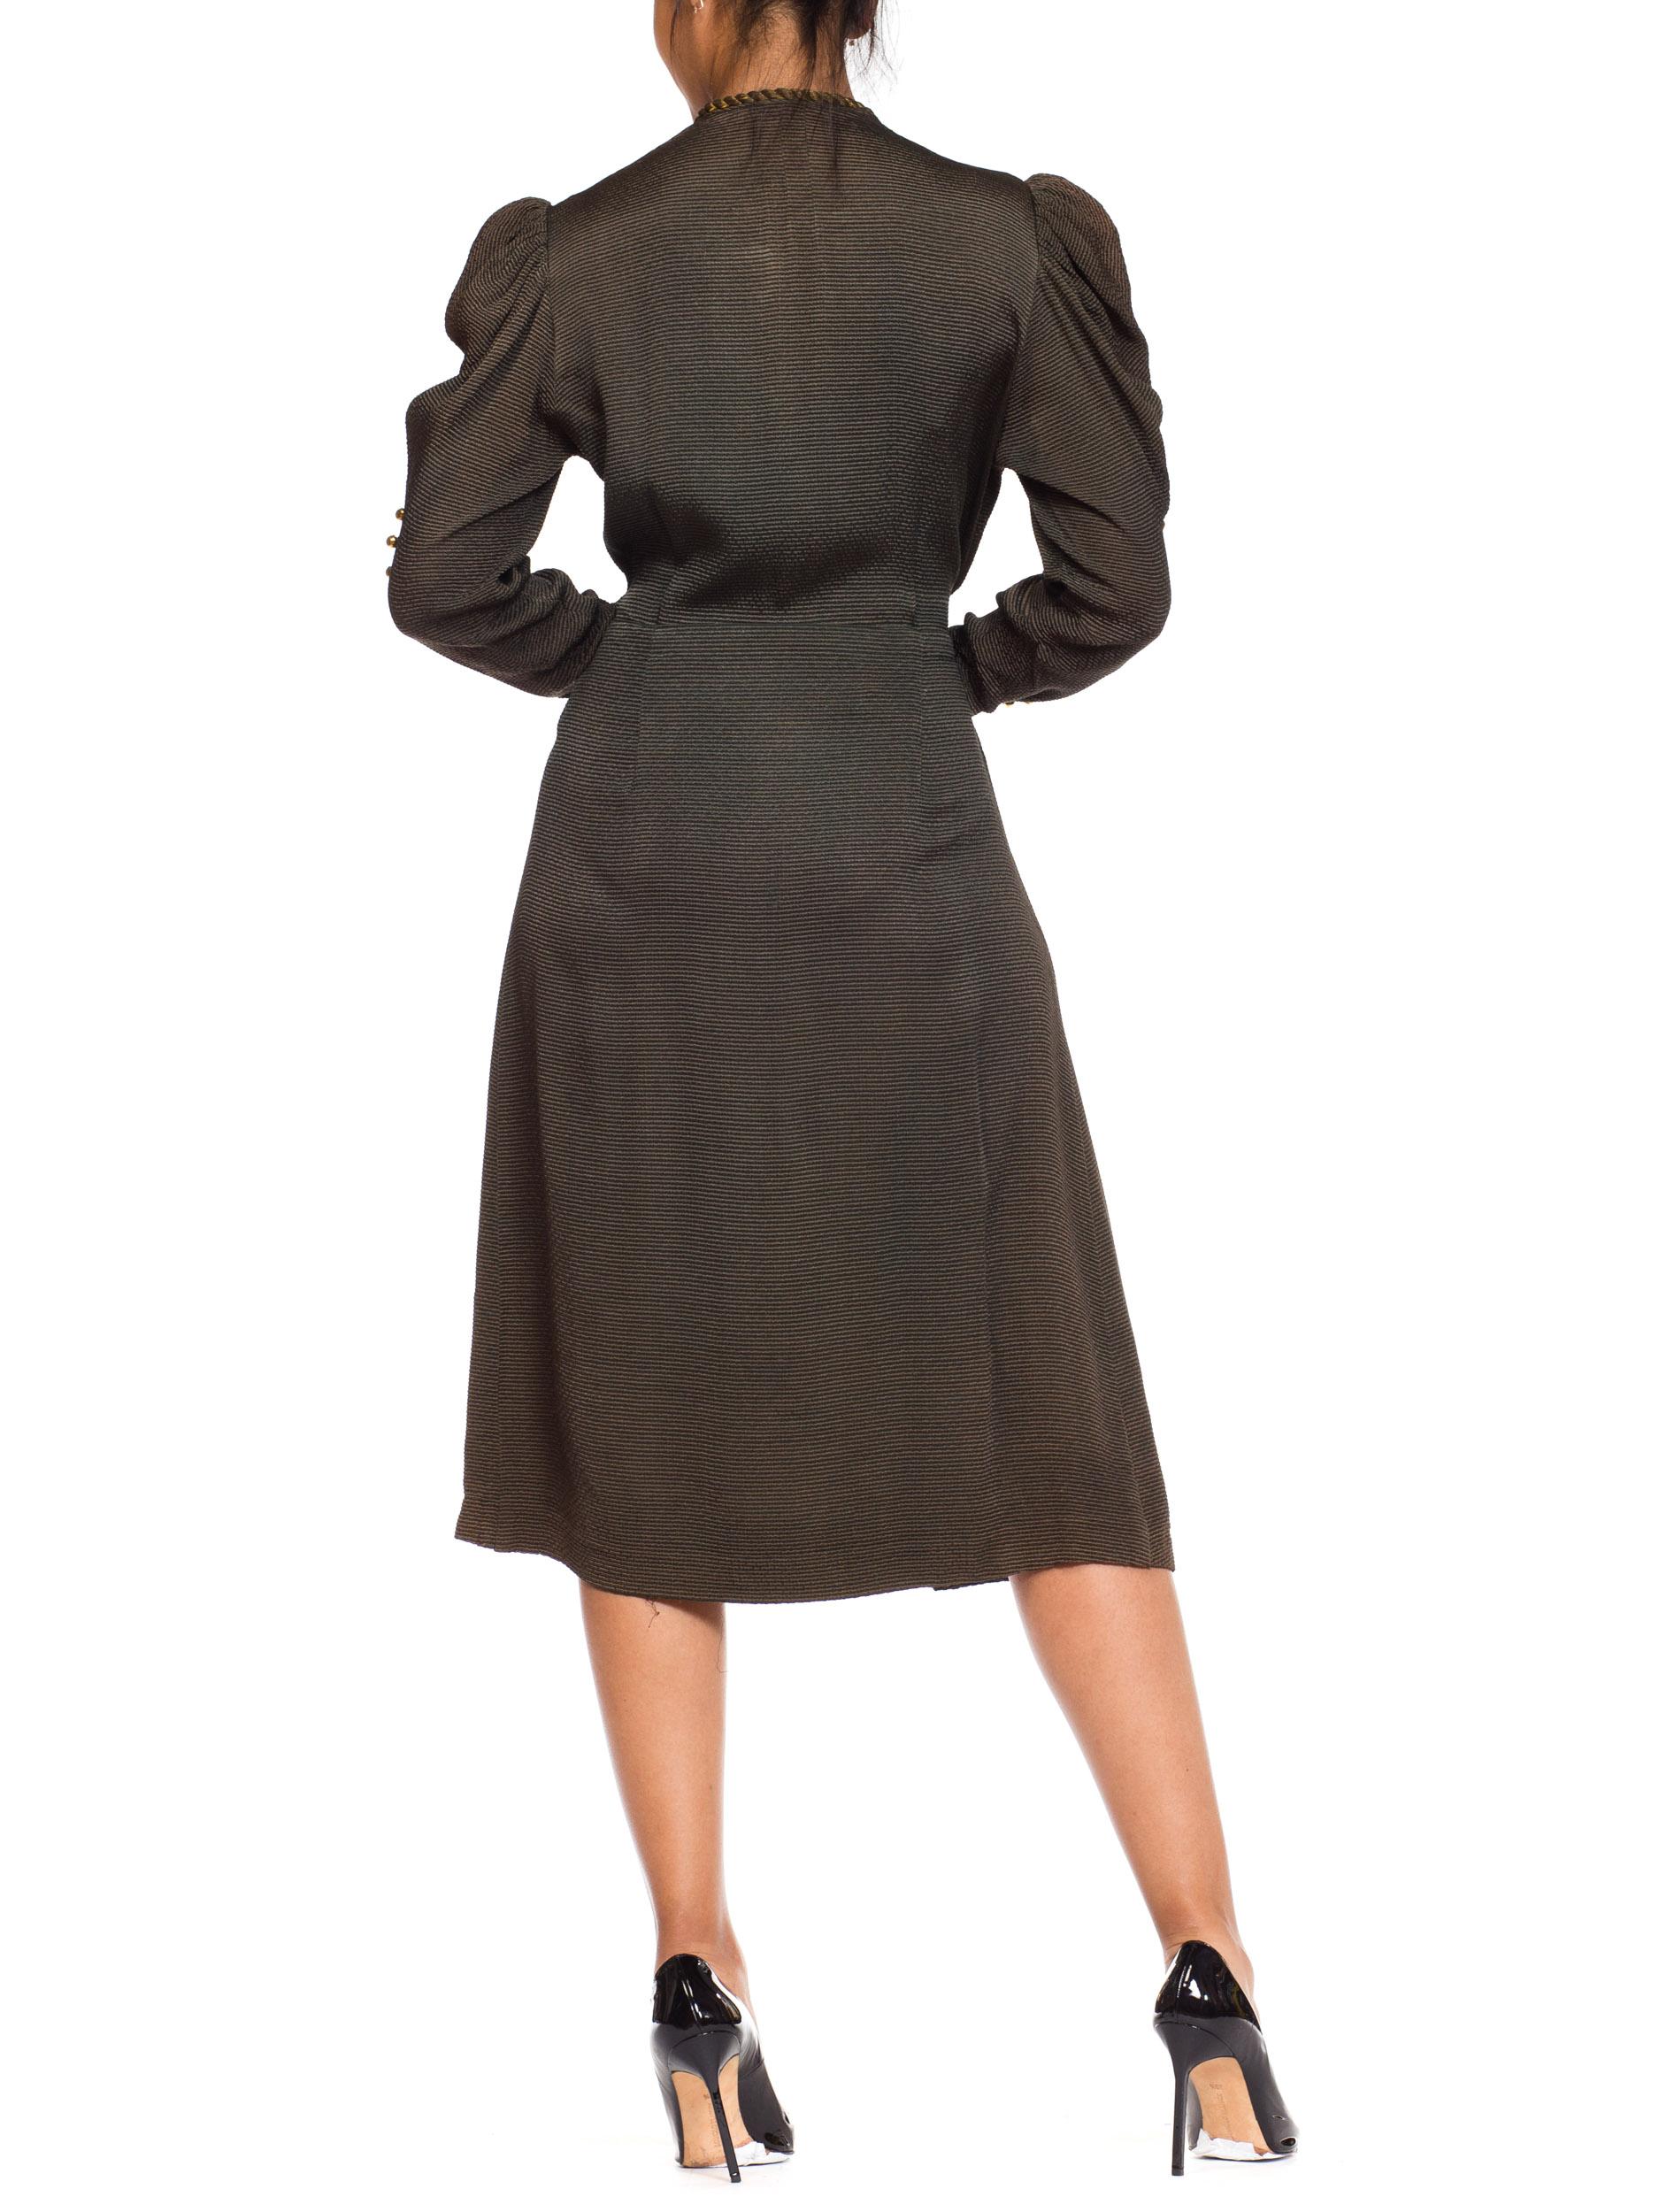 1930s Olive Green Textured Mutton Sleeve Dress 6